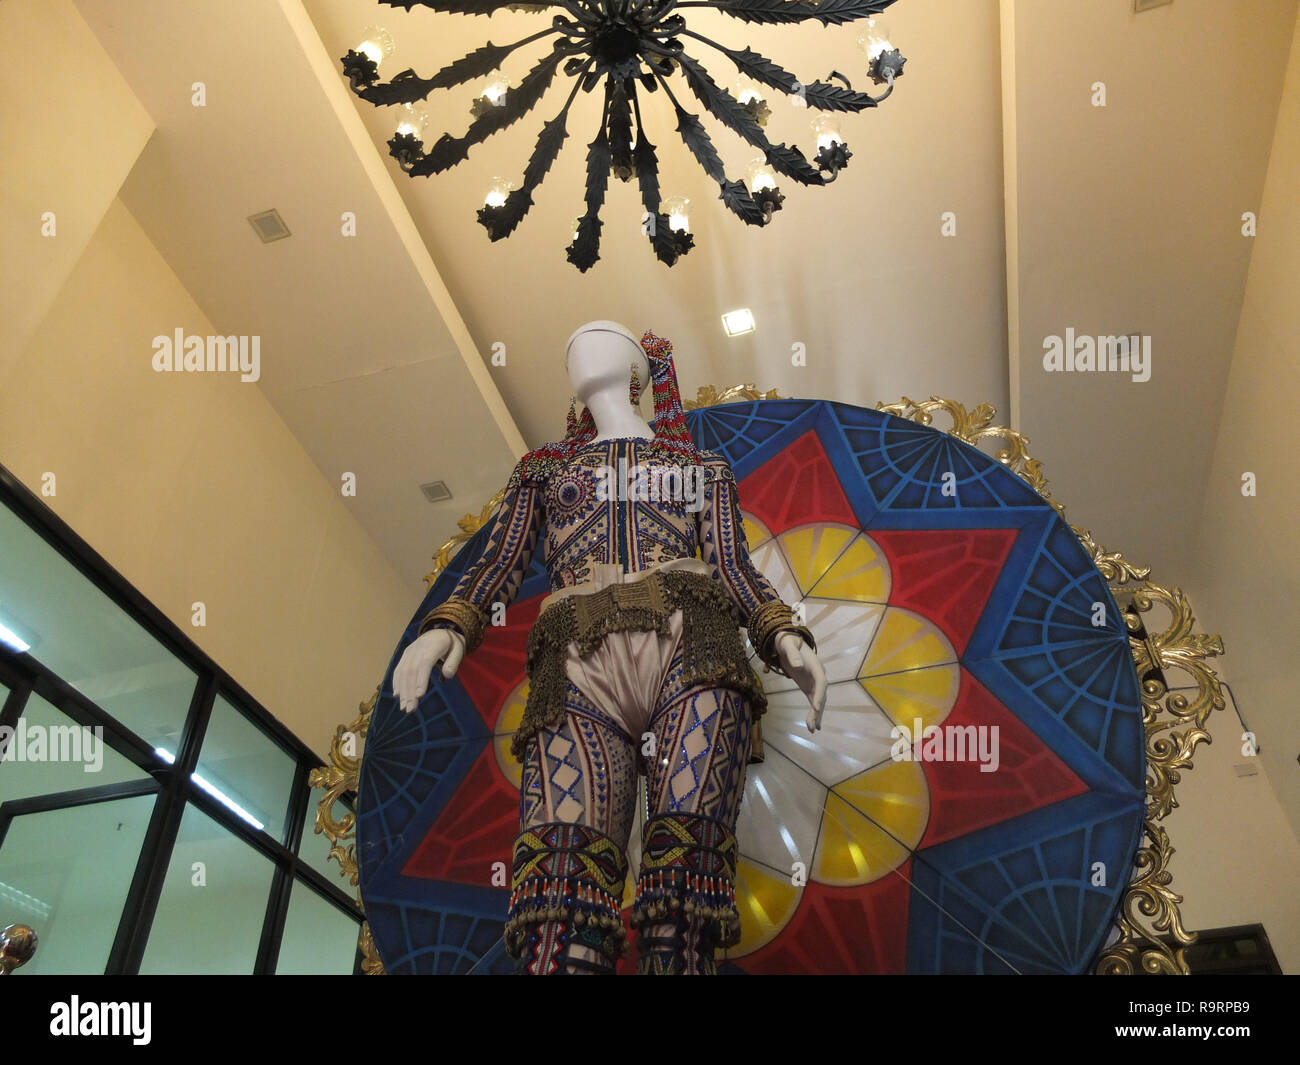 Manila, Philippines. 18th Mar, 2012. Miss Universe 2018 Catriona Gray's National Costume ensemble with the parol designed by Jearson Demavivas, along with the team of artists, designers and a historical expert. Credit: Josefiel Rivera/SOPA Images/ZUMA Wire/Alamy Live News Stock Photo